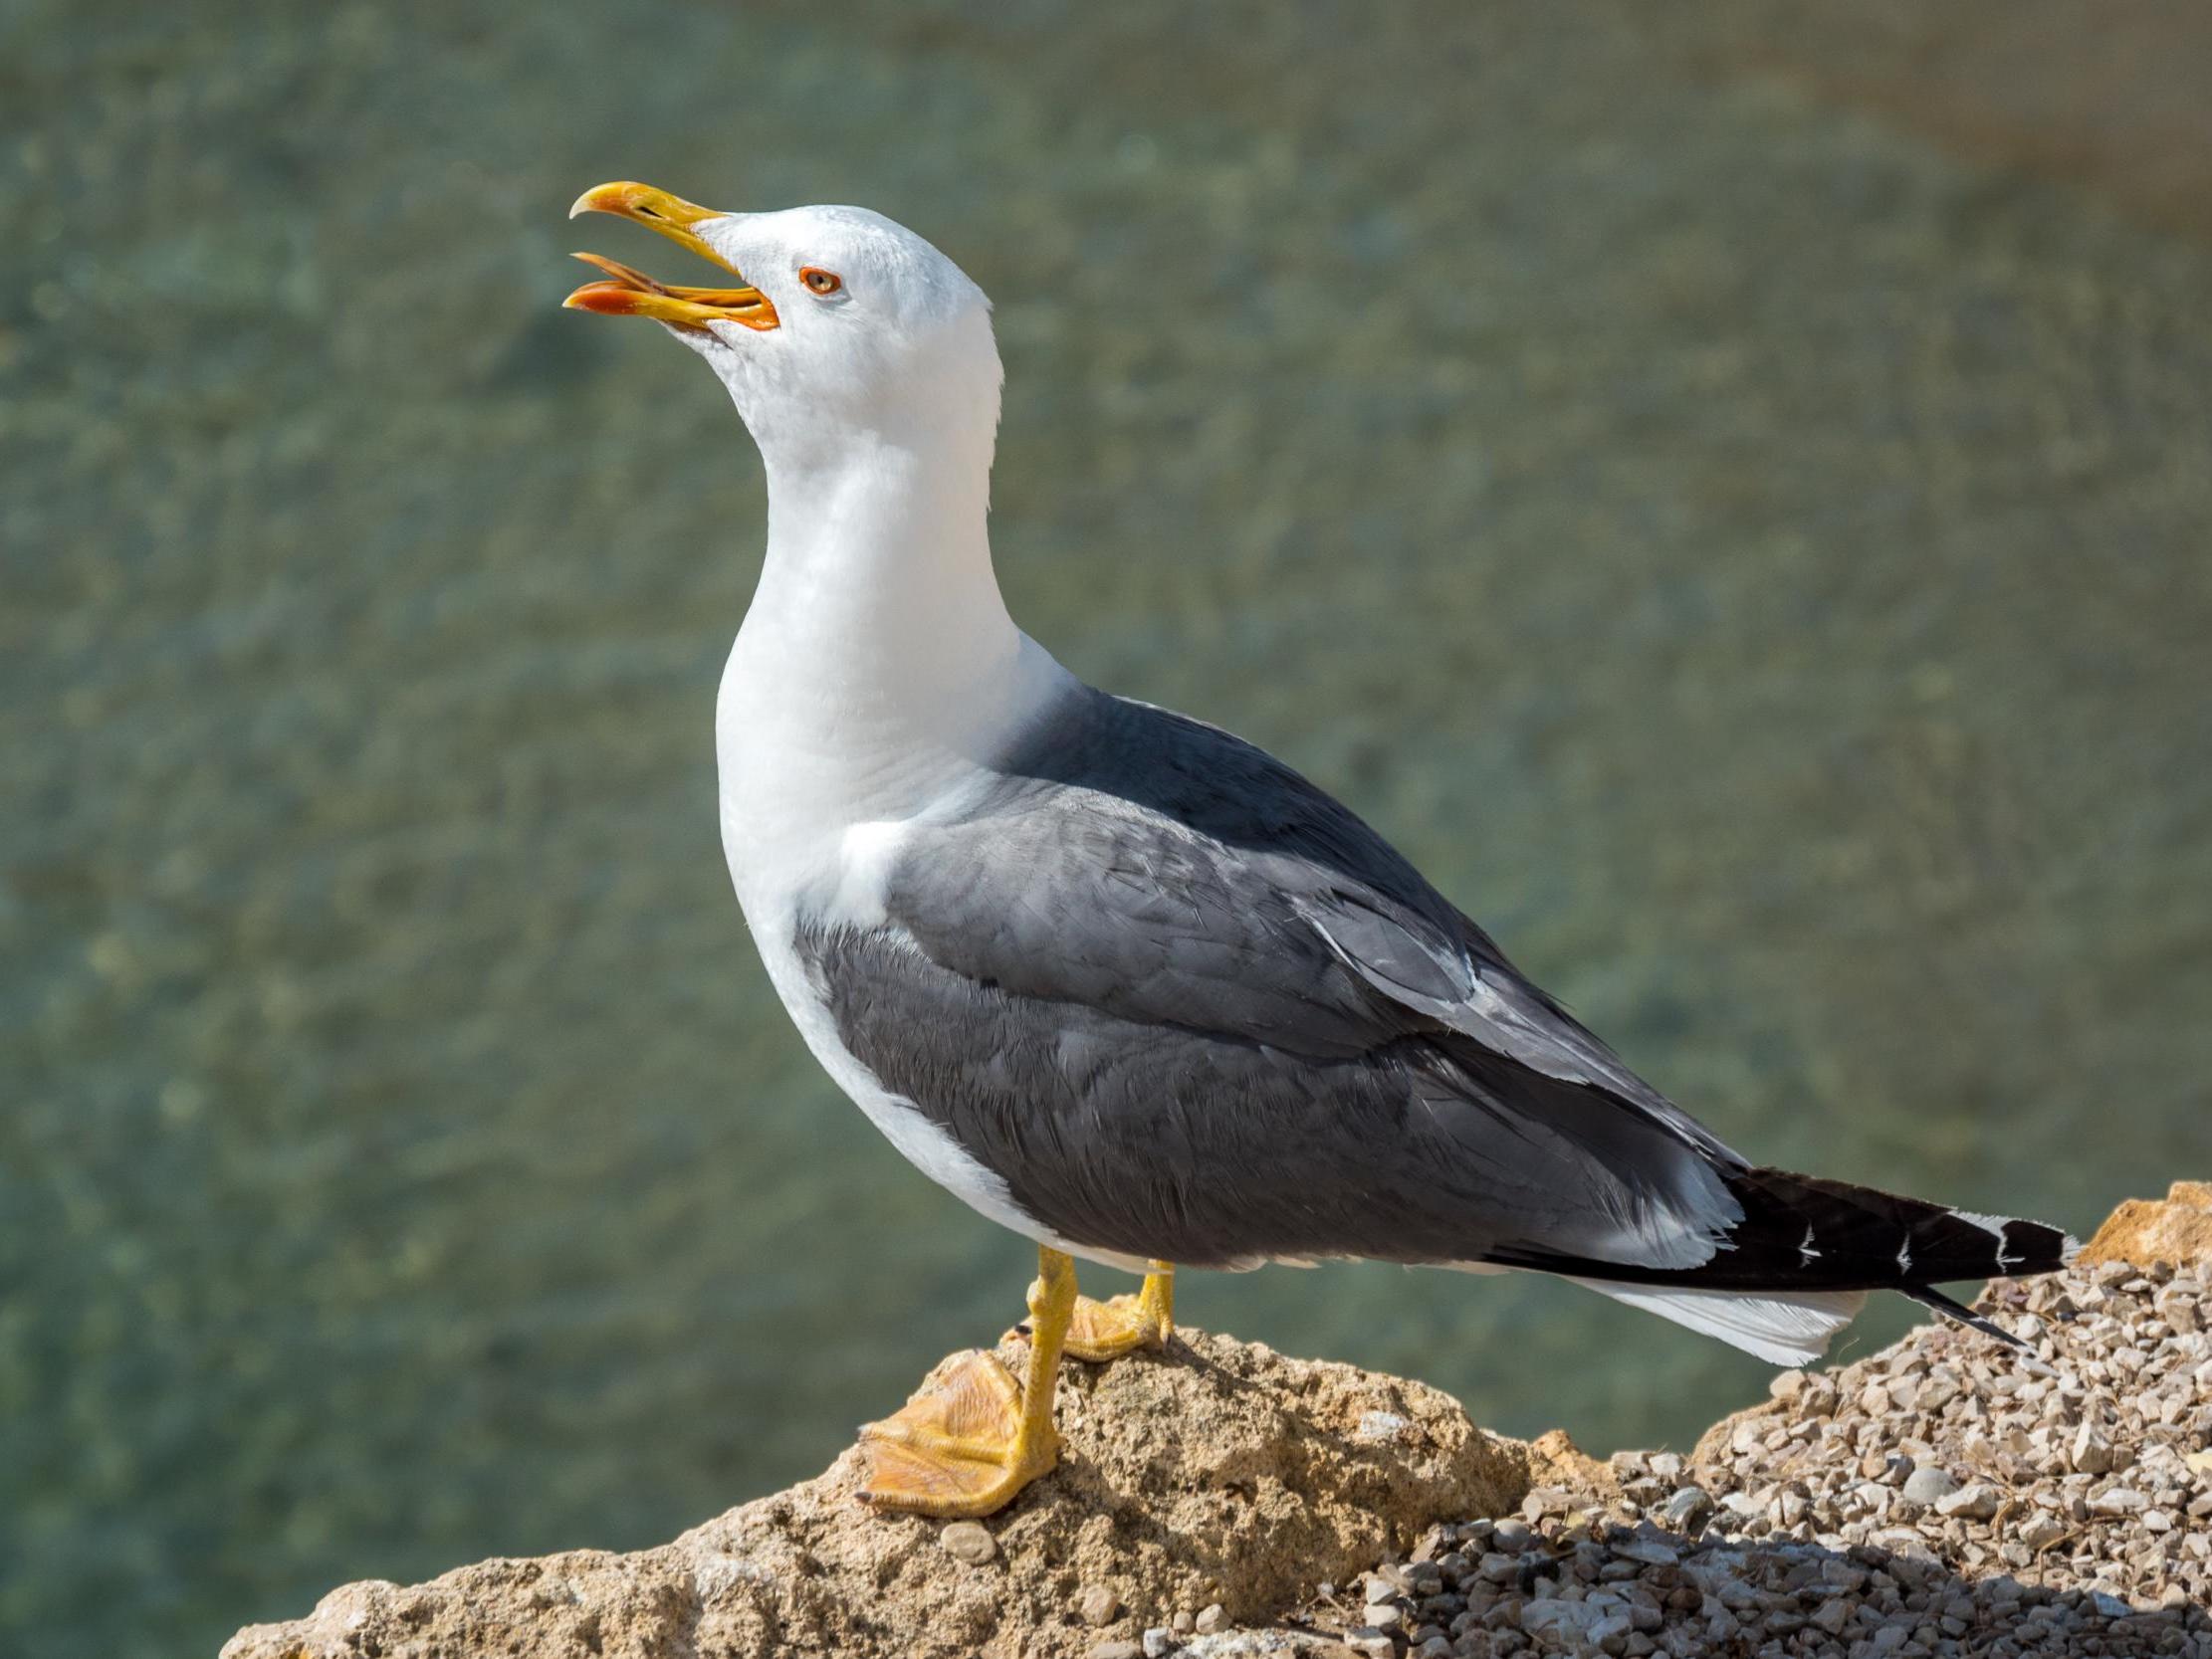 Many birds of prey and seabirds will defend their eggs and young against intruders